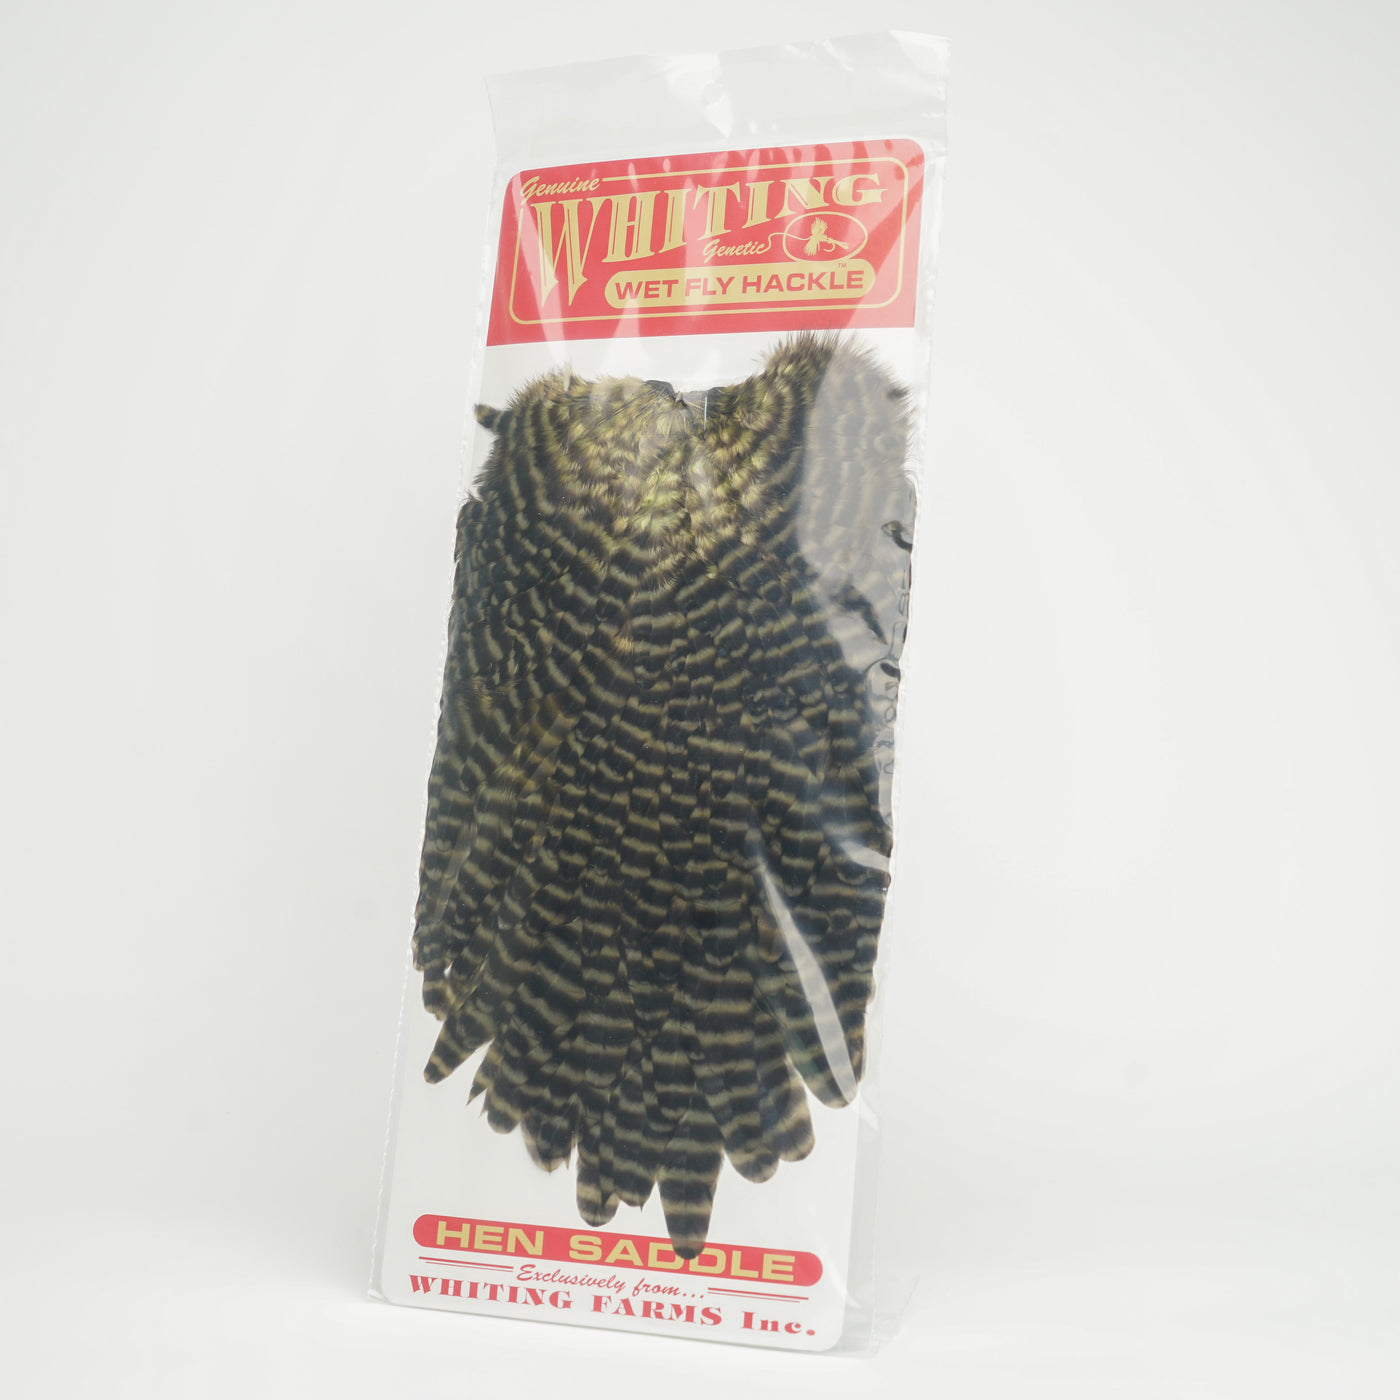 Whiting Farms Genetic Wet Fly Hackle Hen Saddle